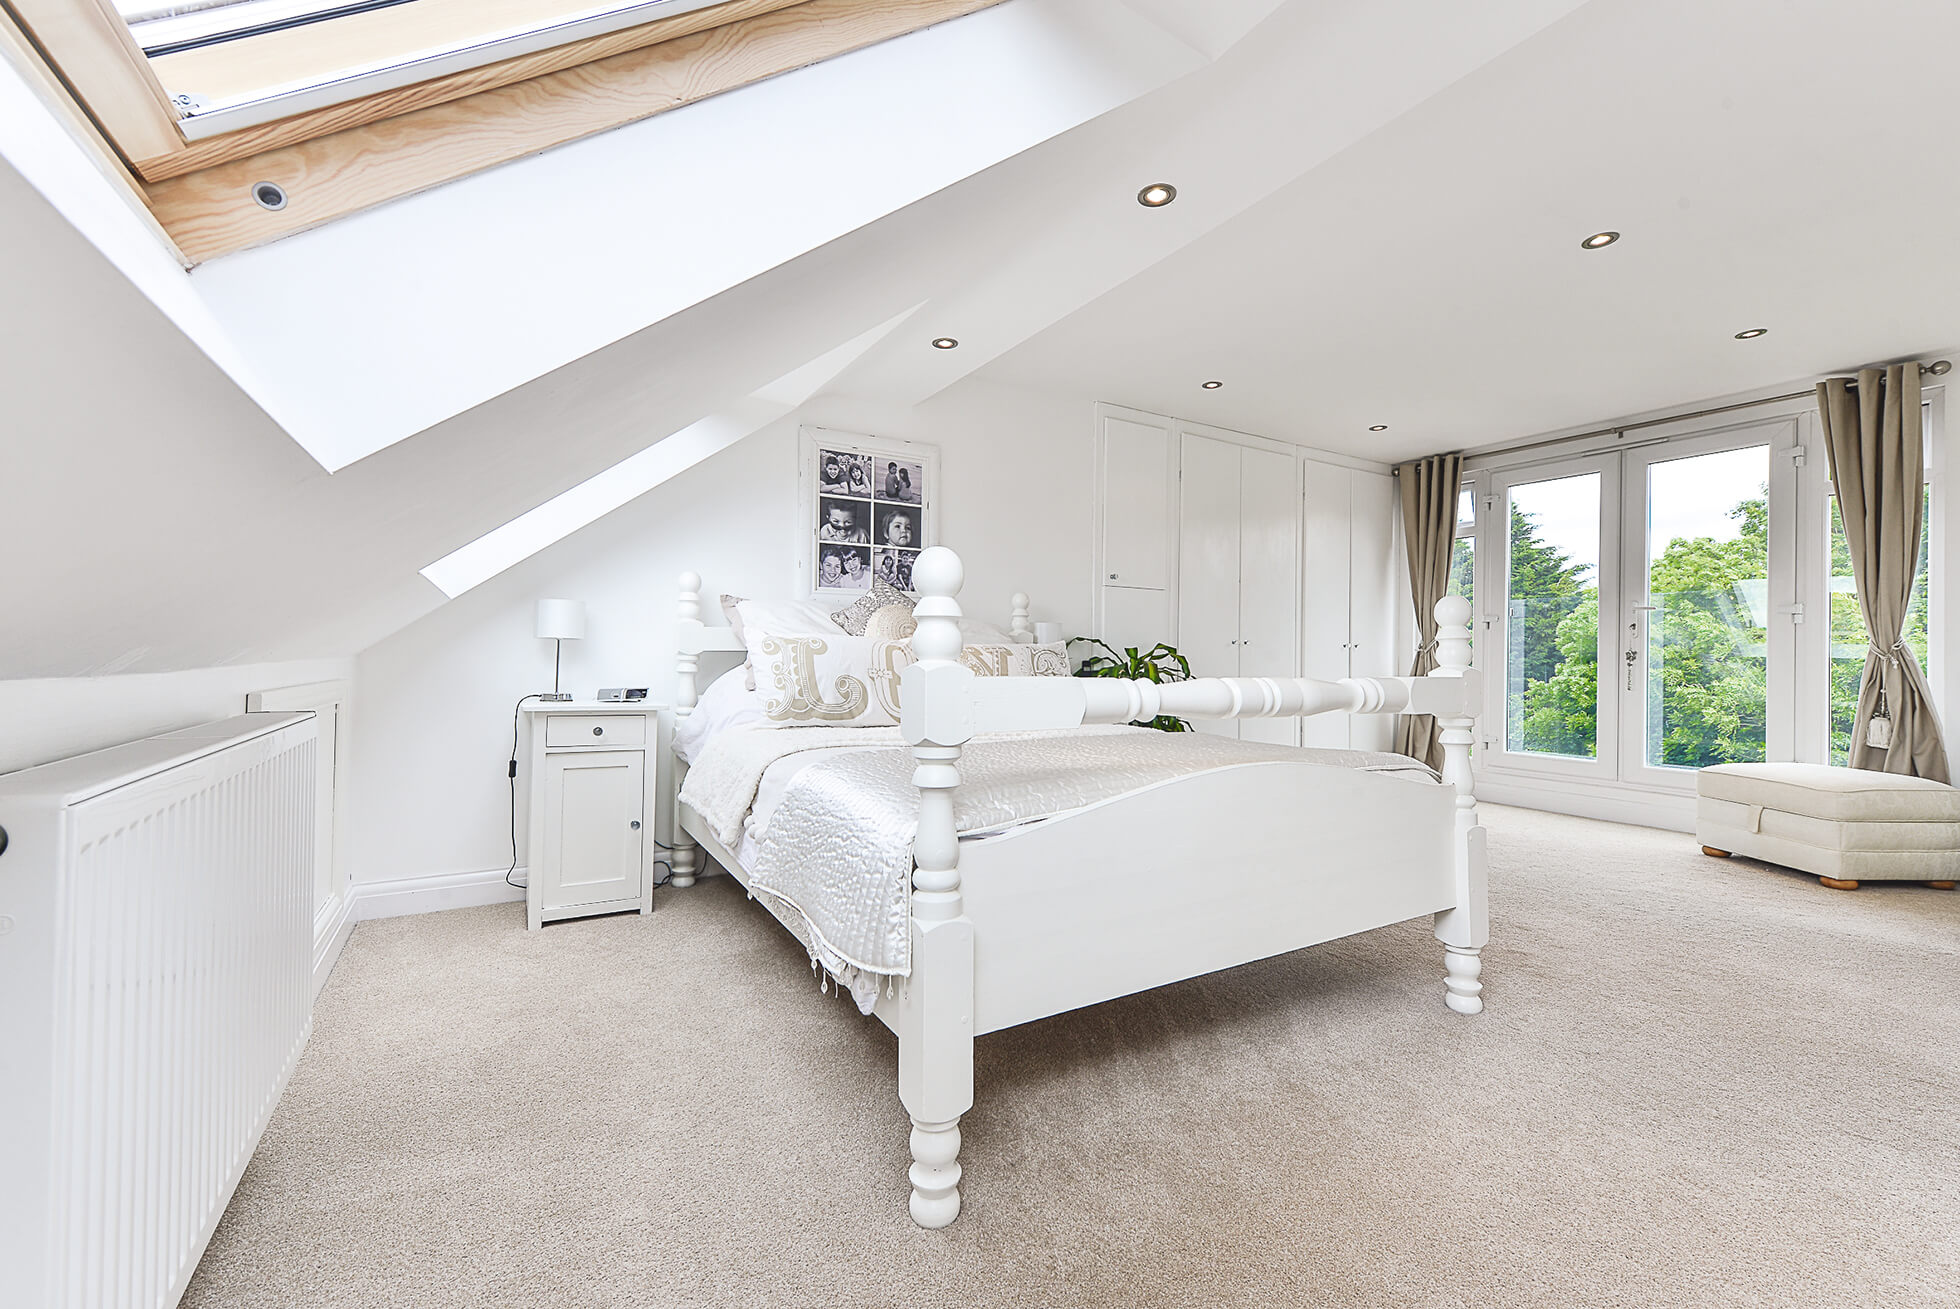 Do you have a question about converting your Loft in South Oxhey? Here are the most popular questions asked by our clients.